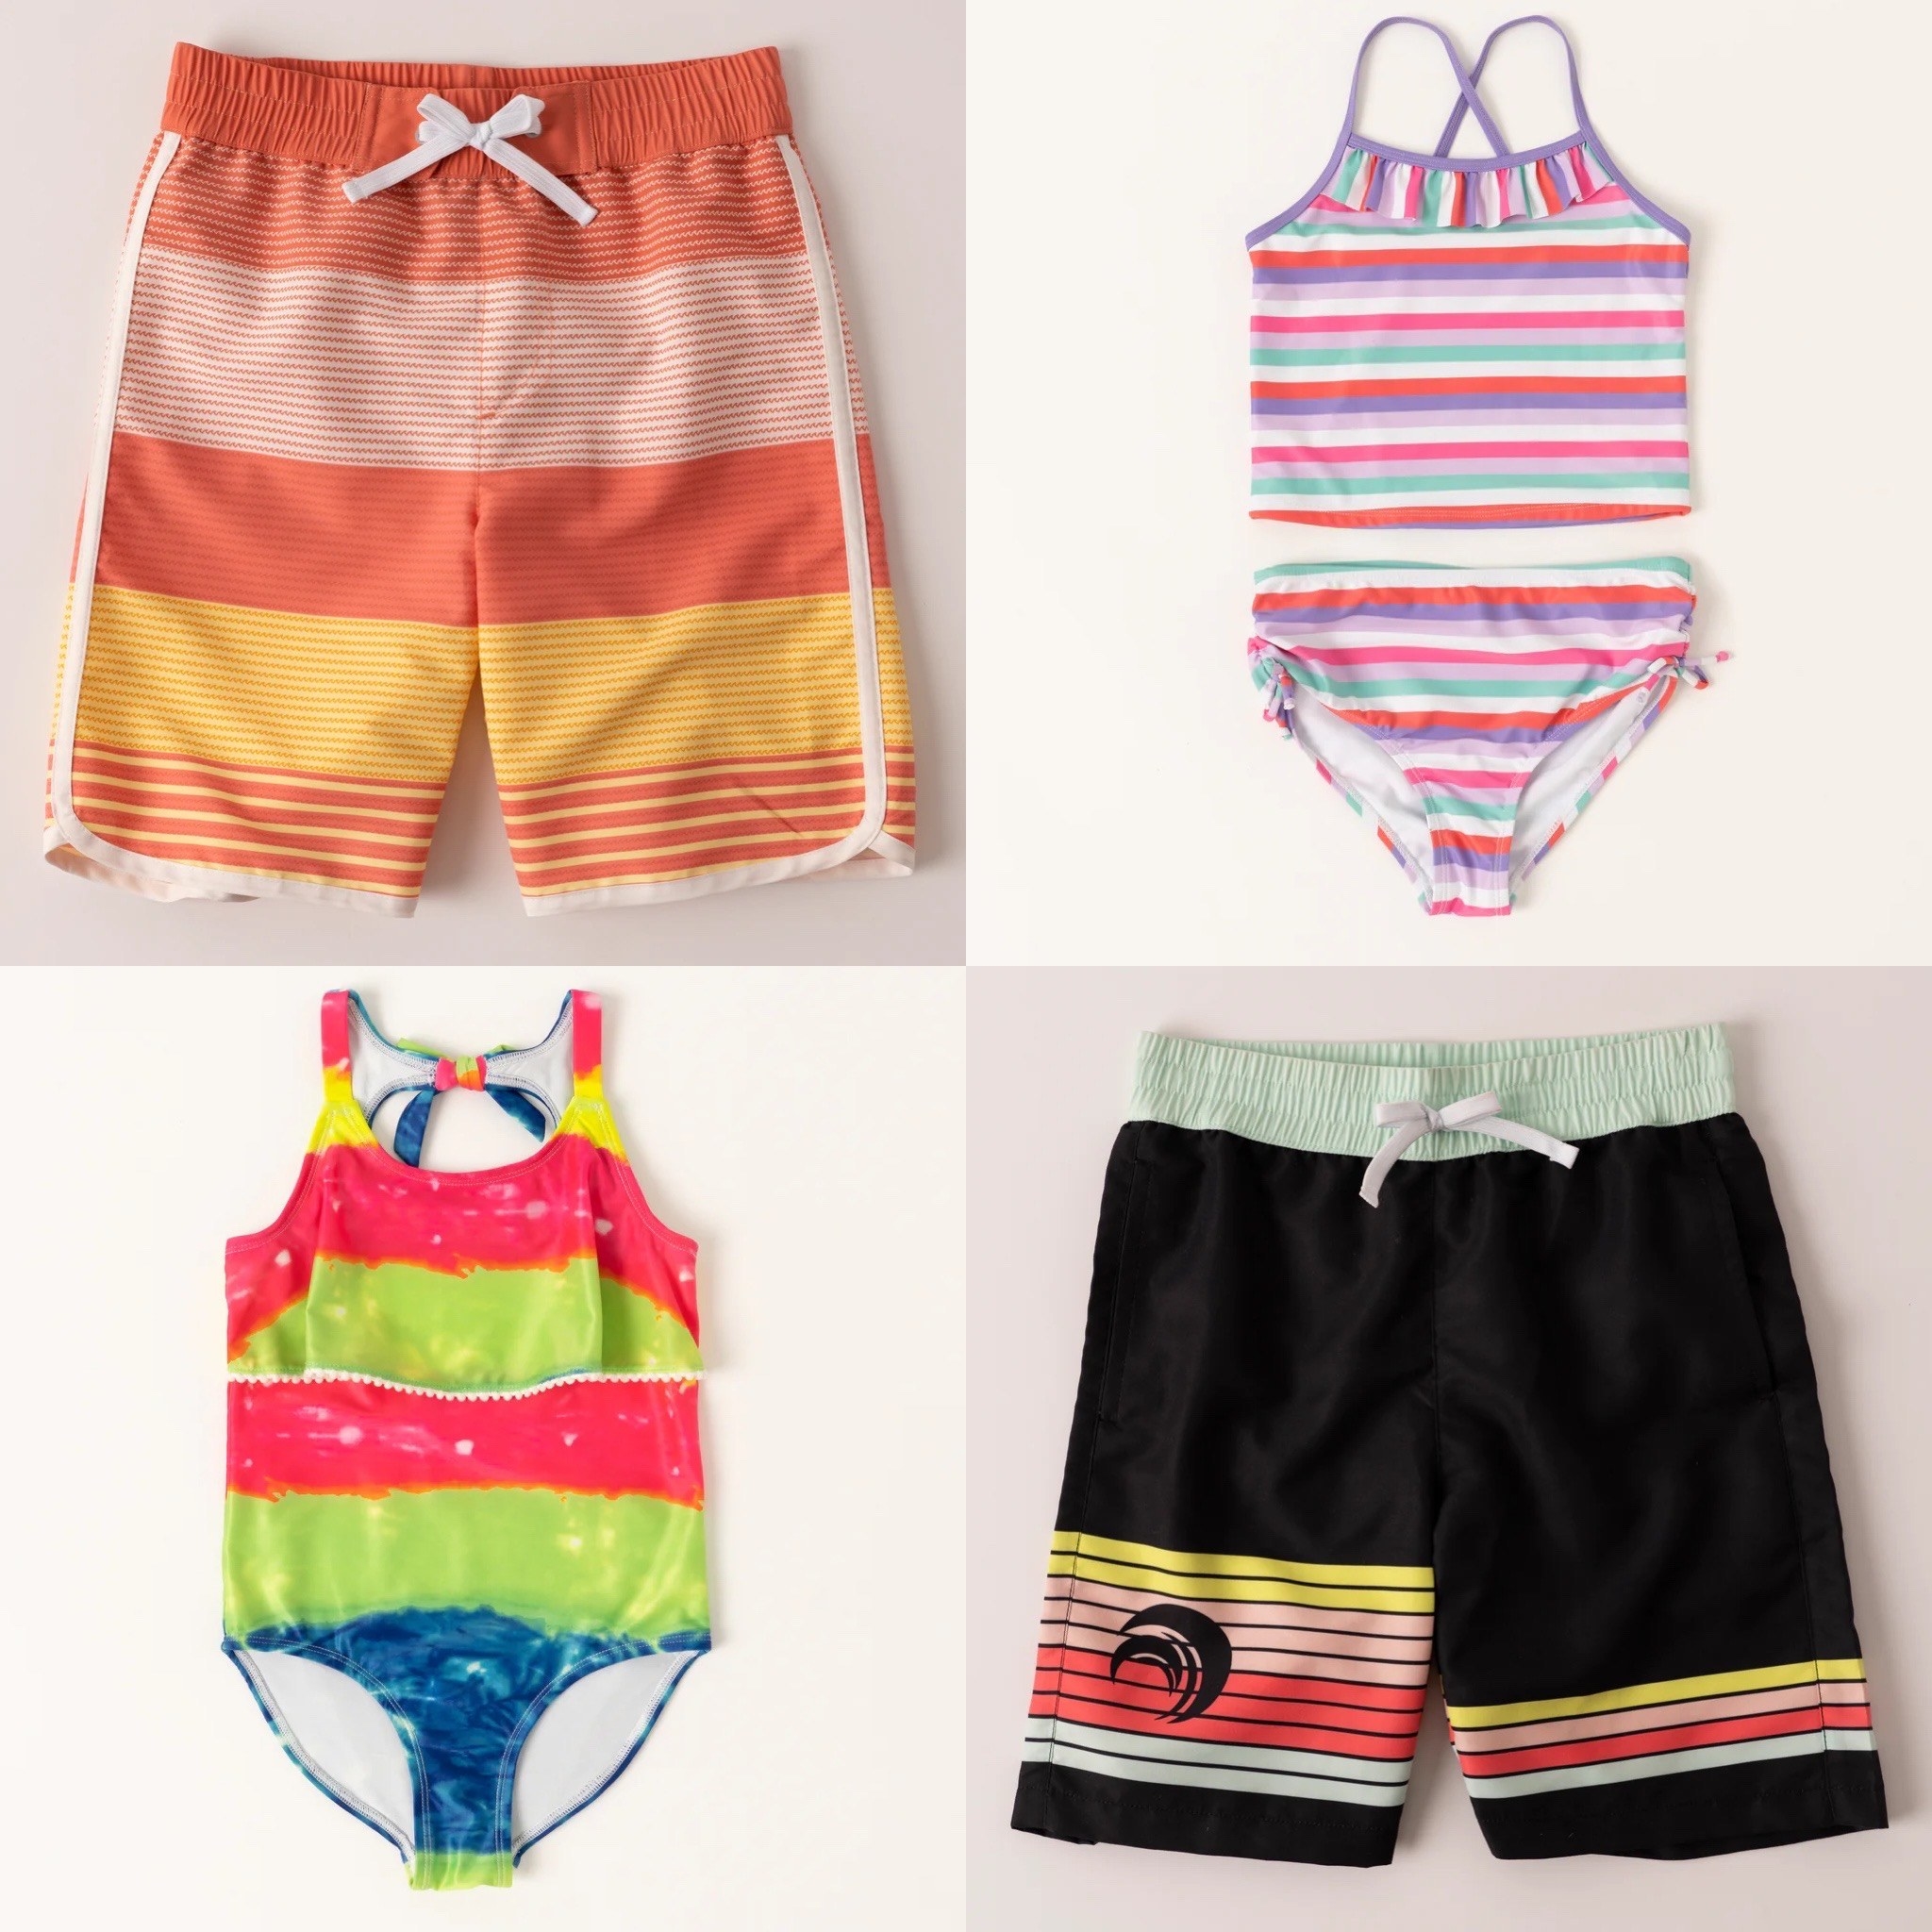 Four images of kid&#x27;s swim trunks and swimsuit in carious bright colors